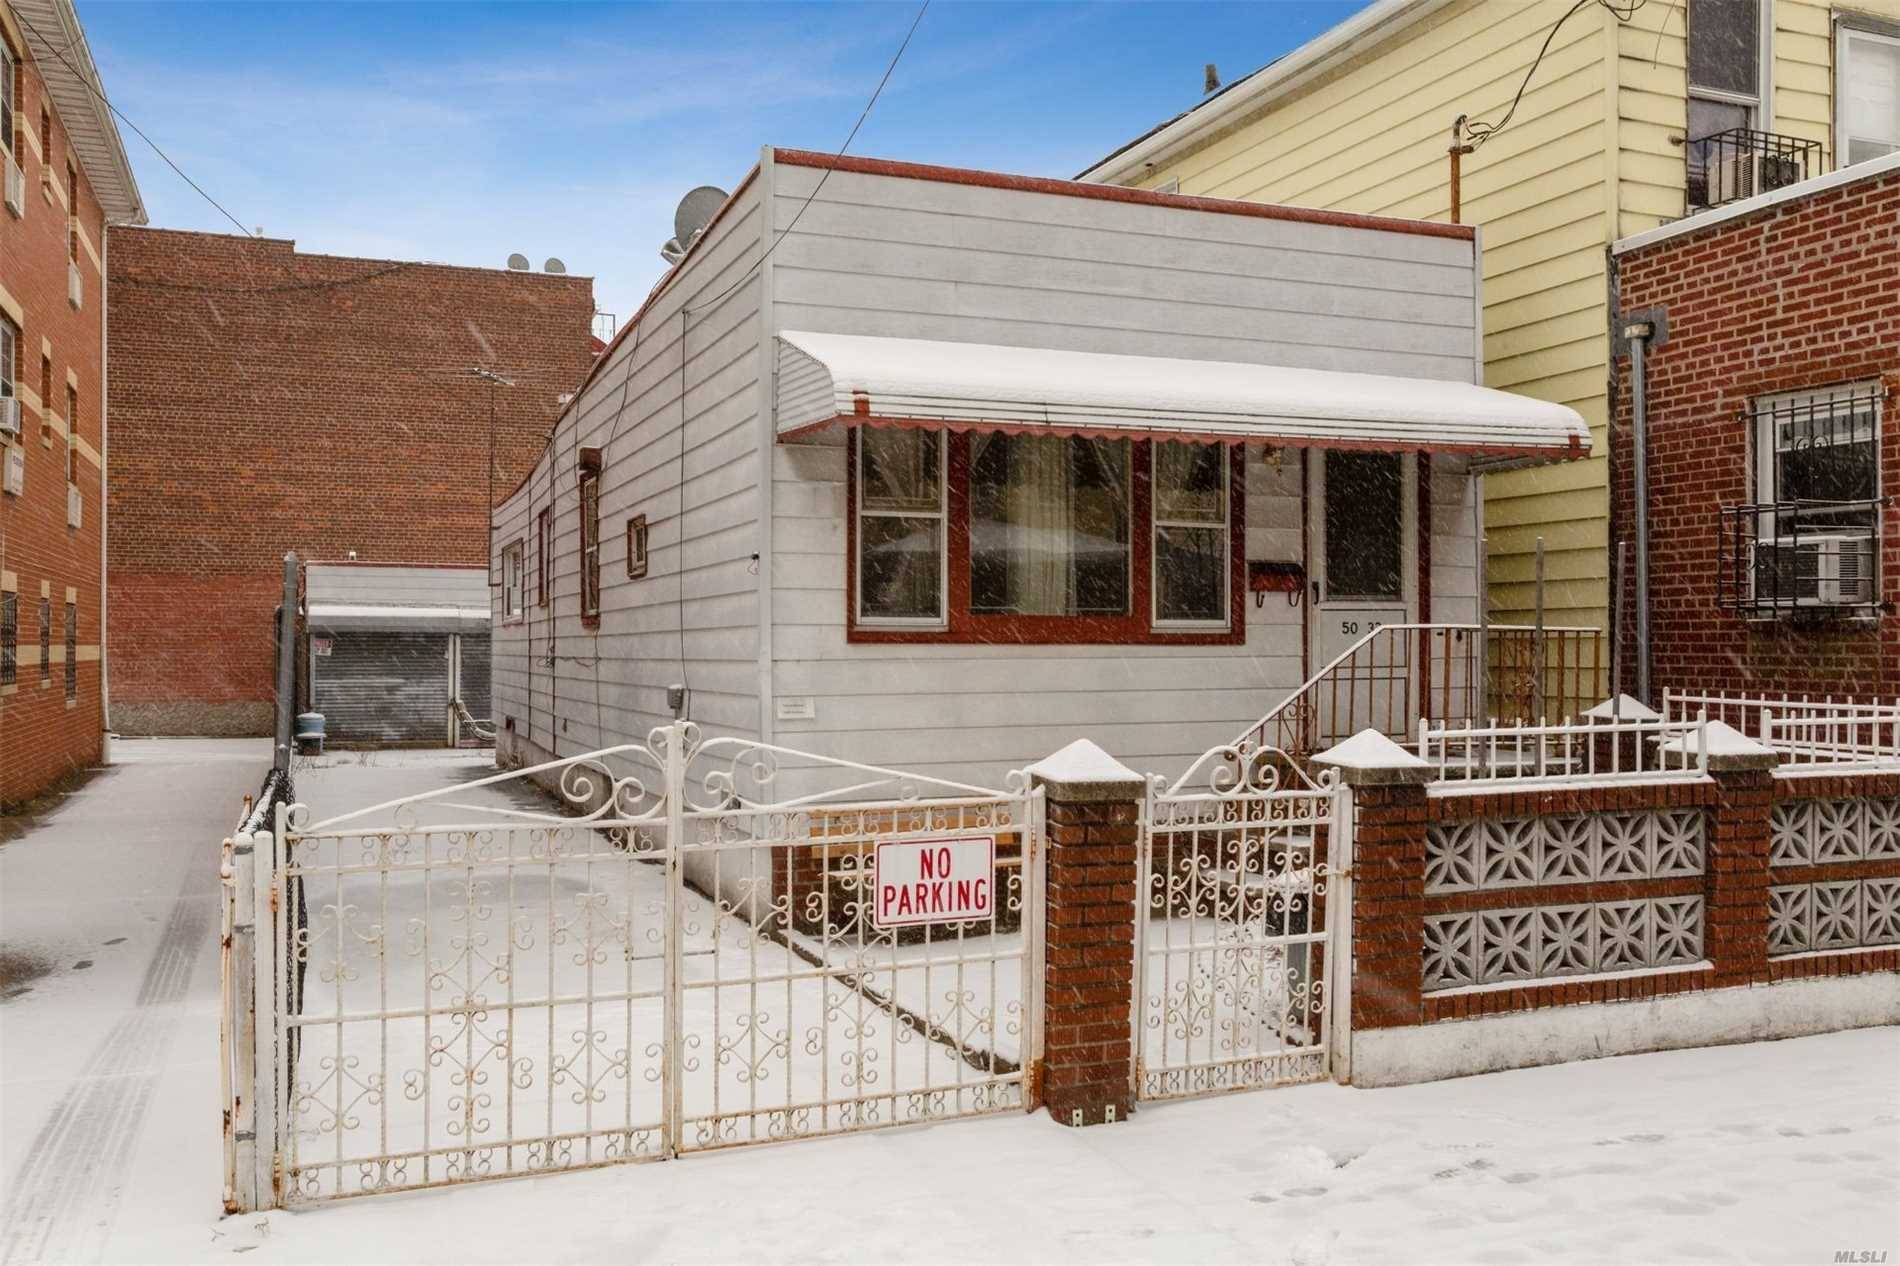 Great for Investors ! ! Great Property In R 5 Zoning With Lots Of Character and Potential.